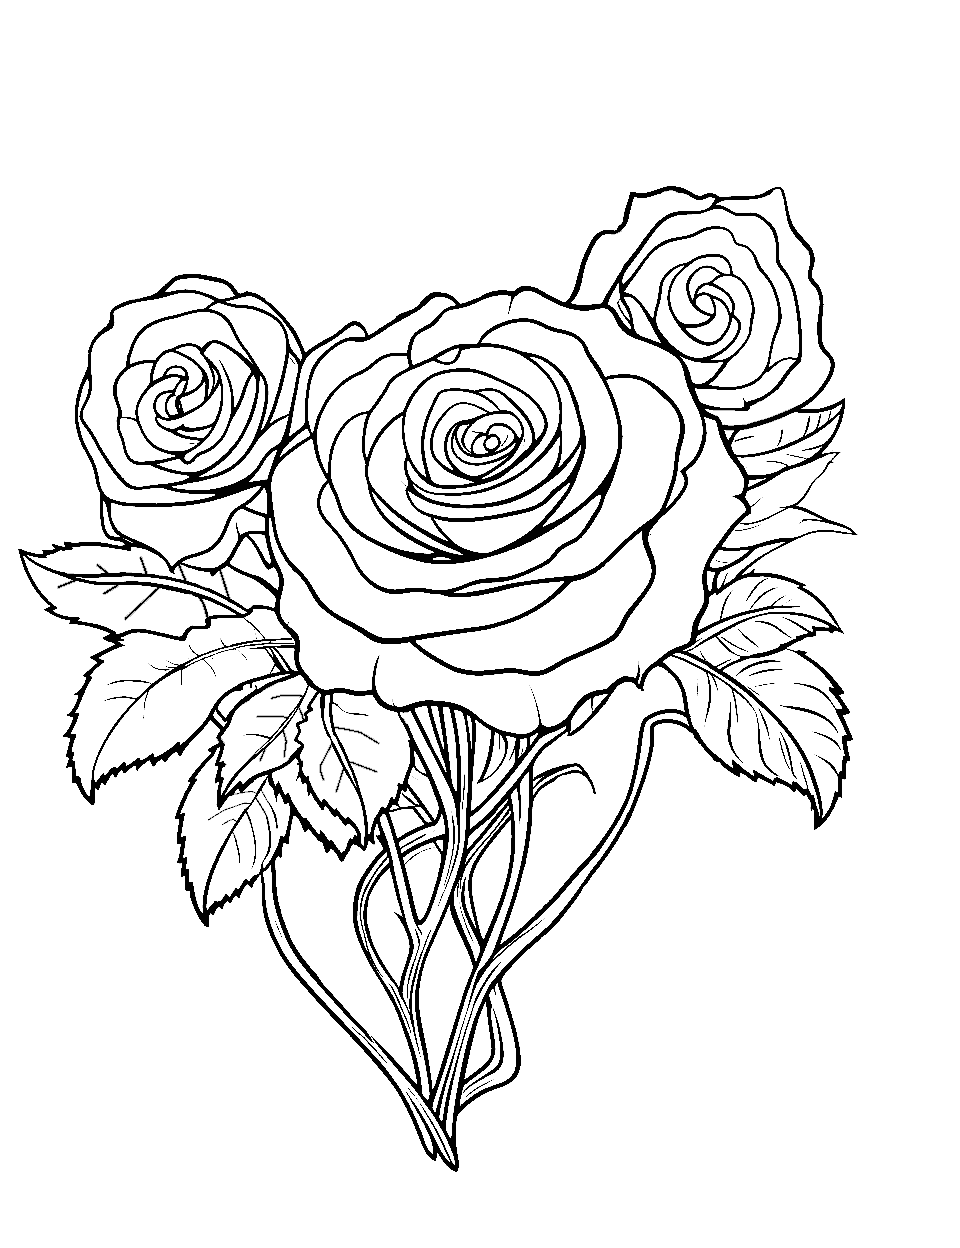 Heart Shaped Roses Coloring Page - Heart-shaped roses with a protective barrier of intertwining vines.